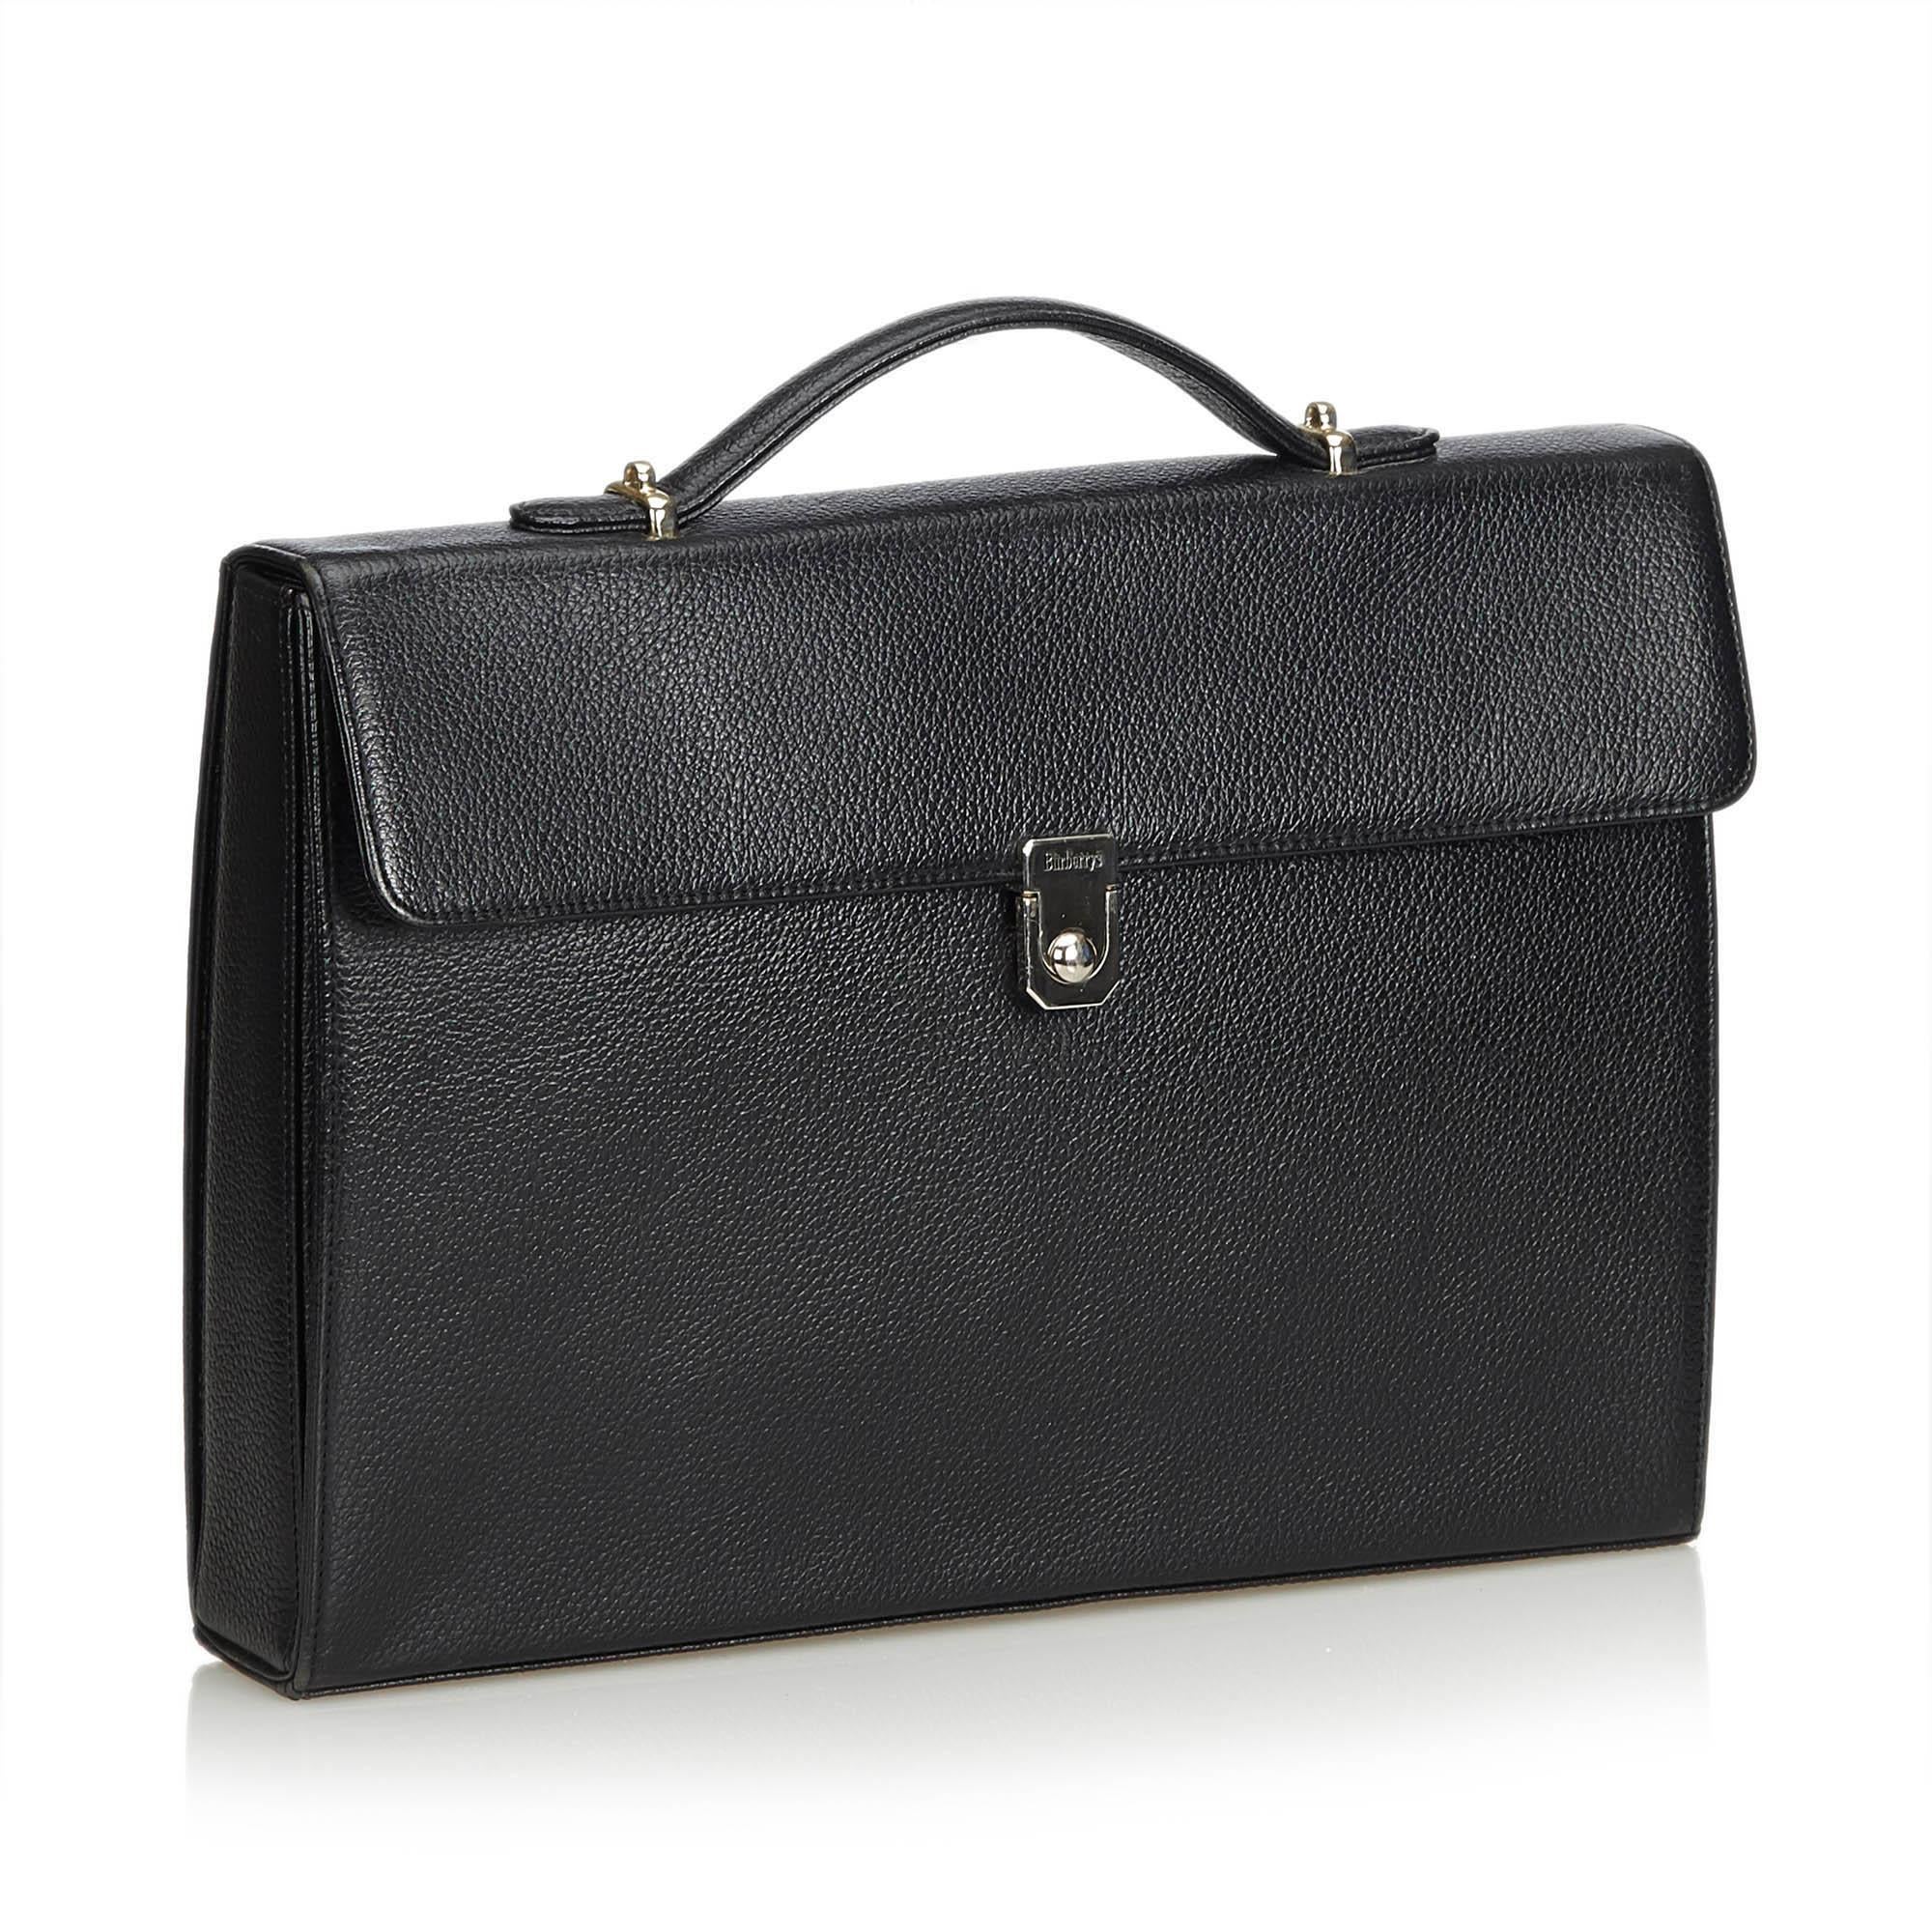 This briefcase features a leather body, flat top handle, flat strap, top flap with push lock closure, exterior slip pocket, and interior zip and slip pockets. It carries as AB condition rating.

Inclusions: 
This item does not come with